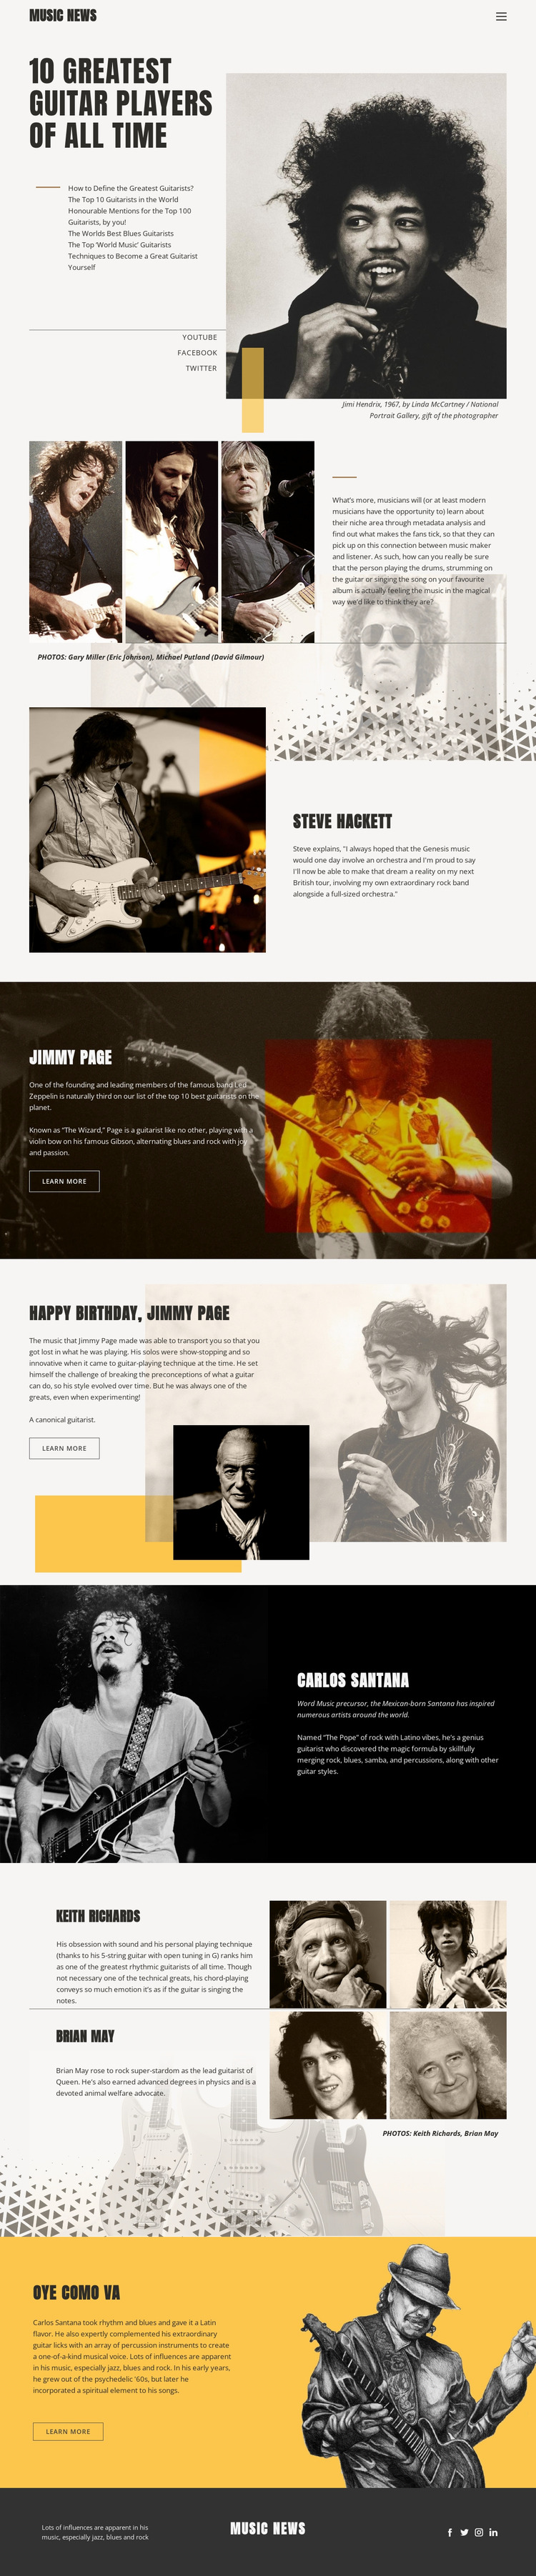 The Top Guitar Players Html Website Builder